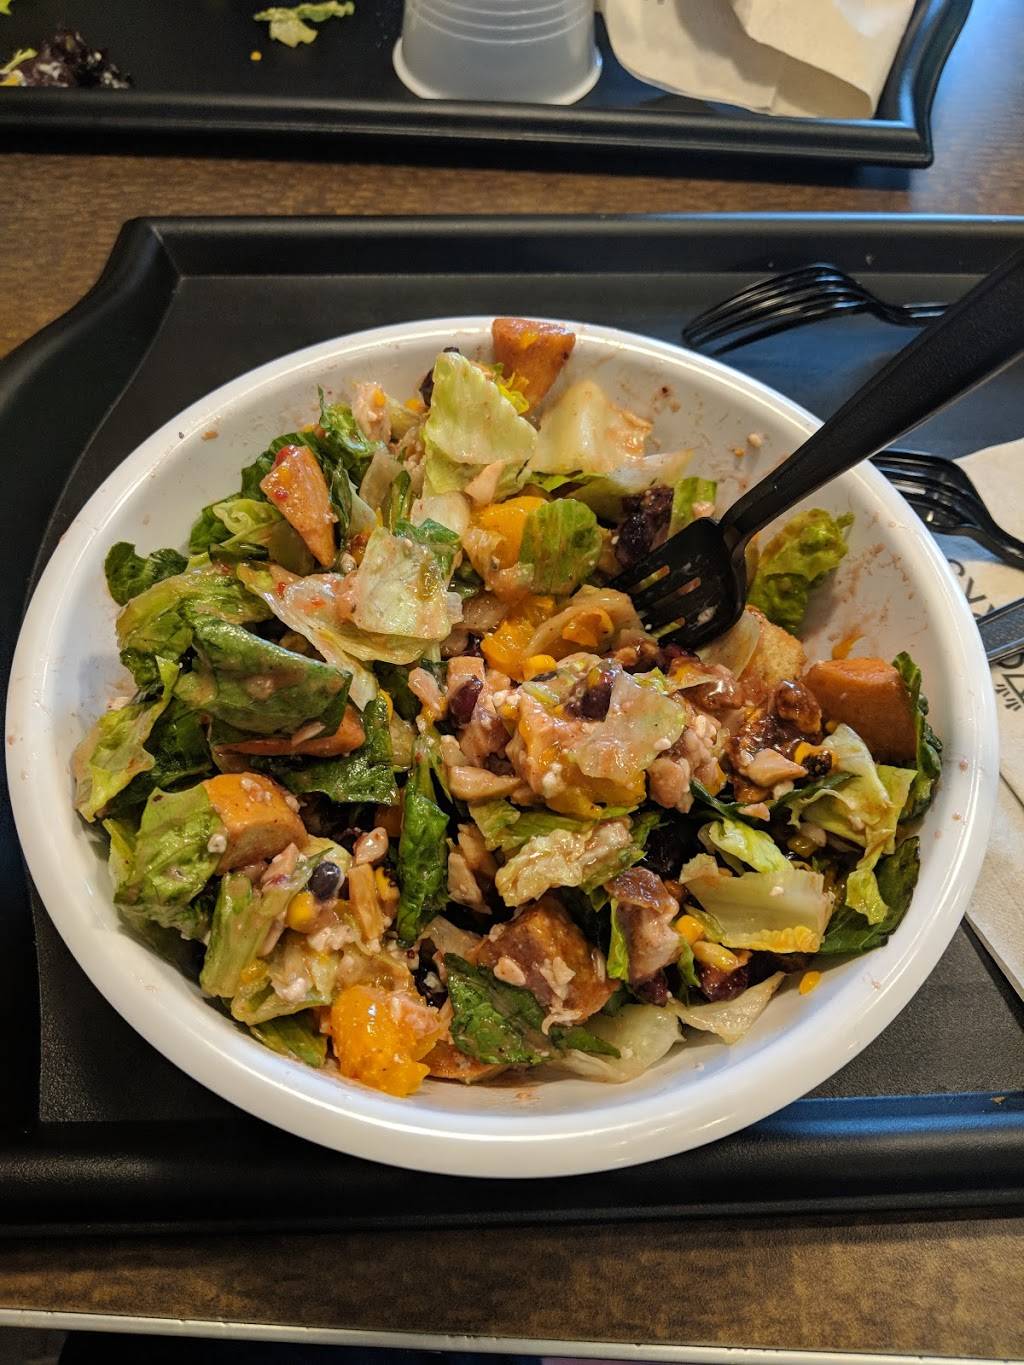 Saladworks | restaurant | 30 Route 17 North, East Rutherford, NJ 07073, USA | 2019398886 OR +1 201-939-8886